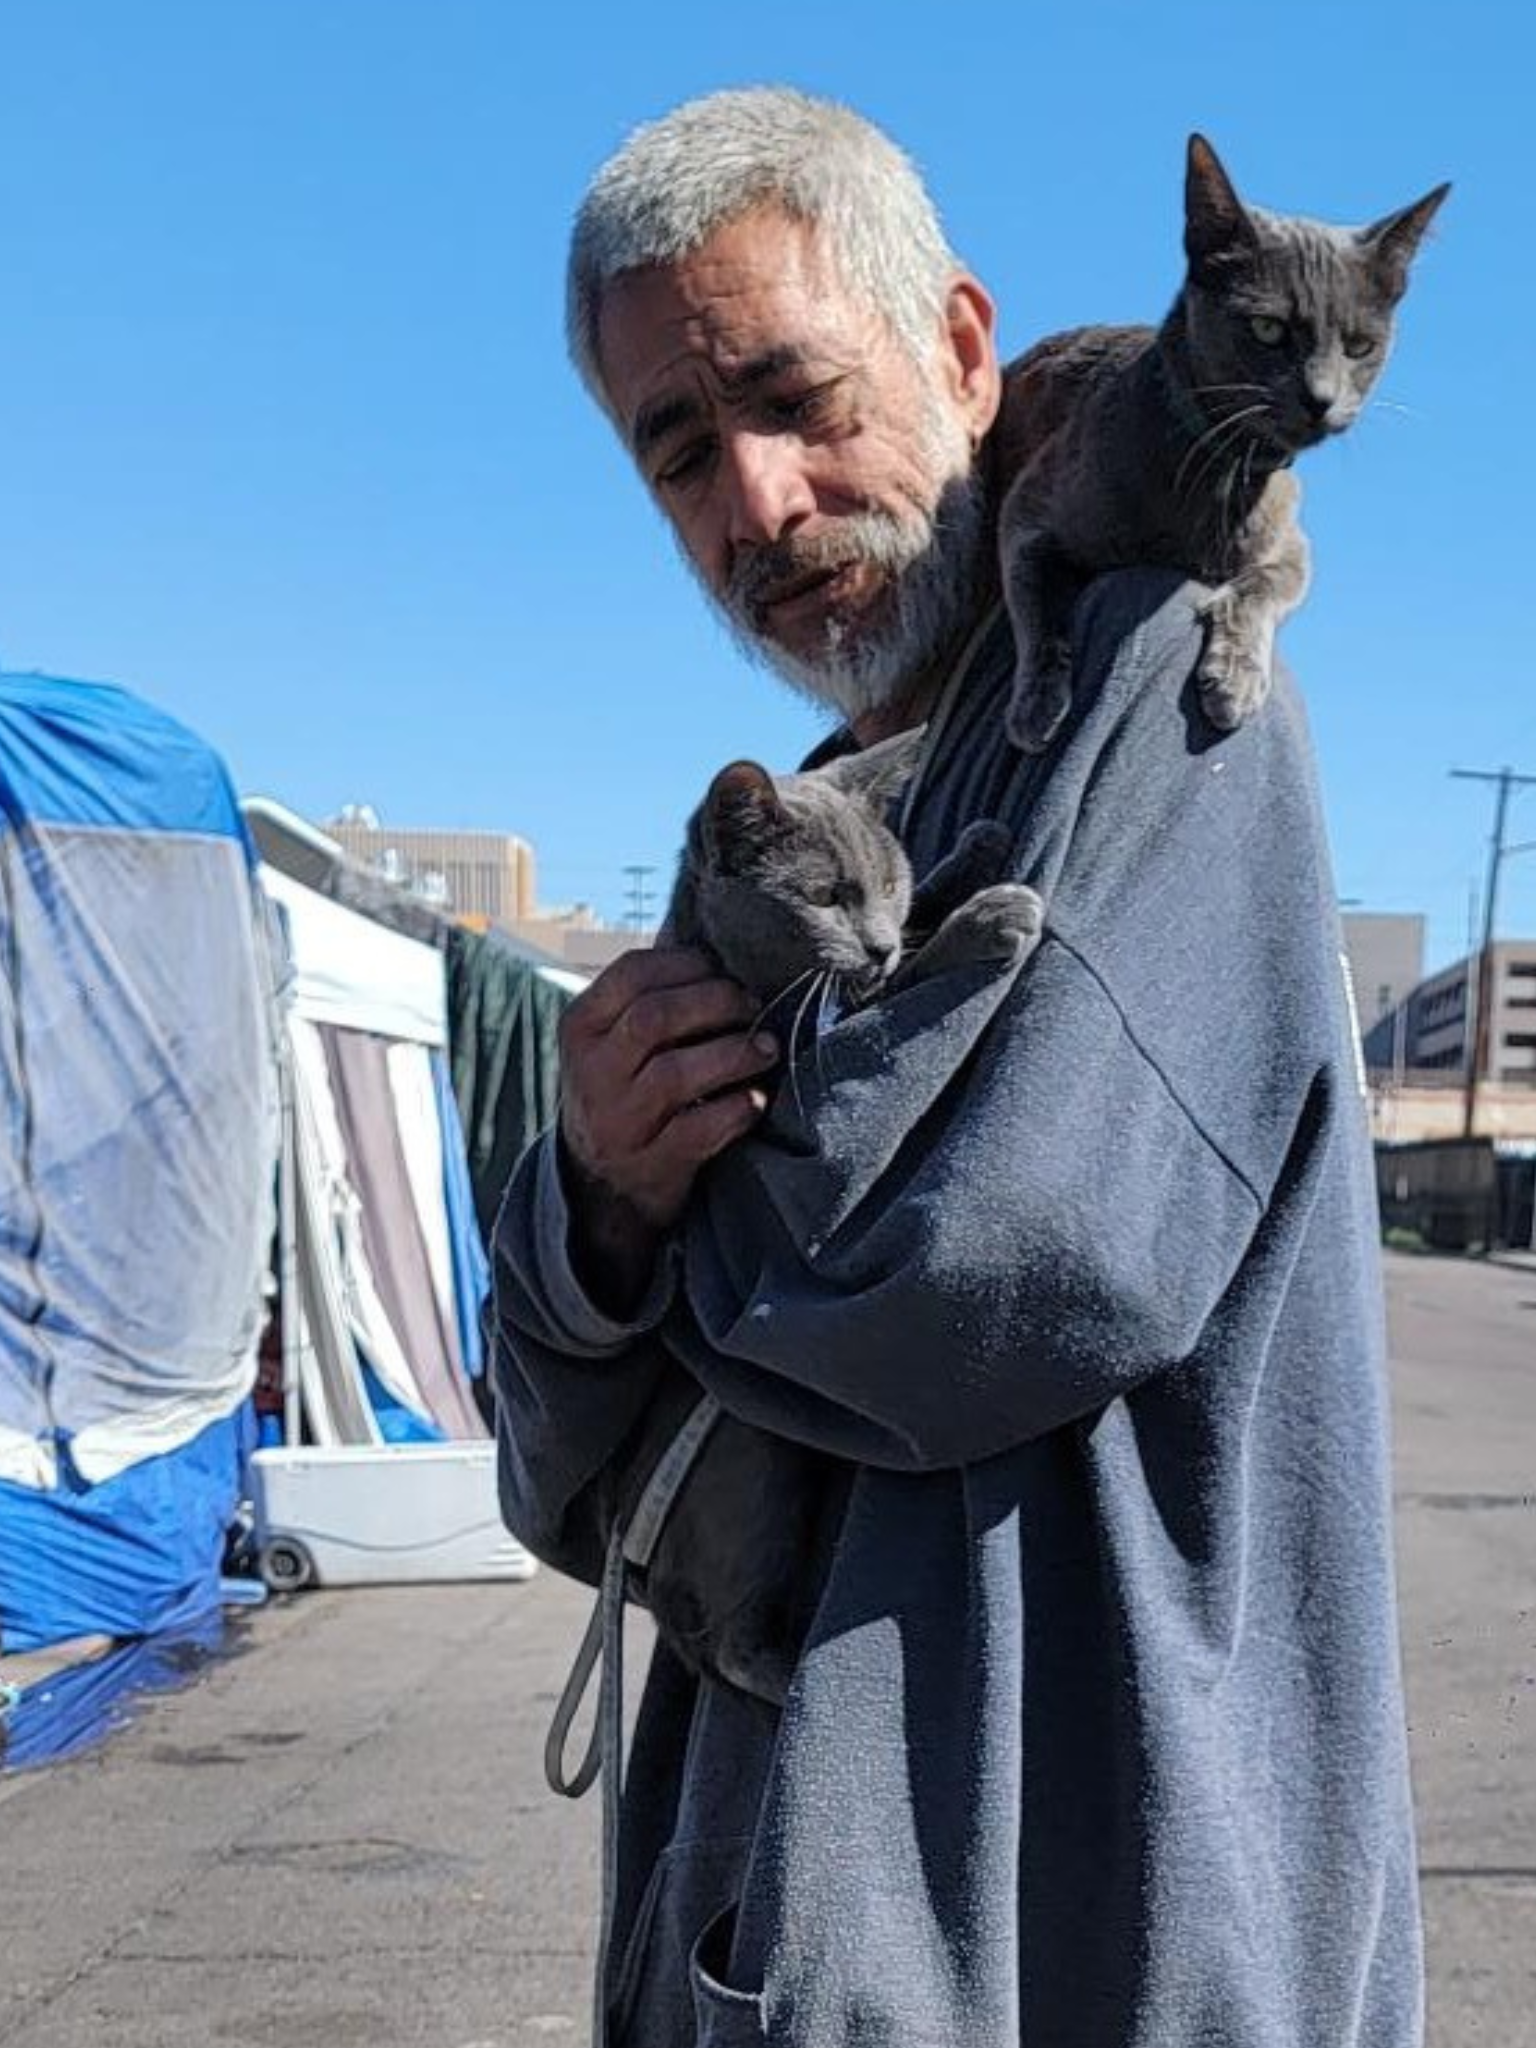 Pet resources for unhoused people and pets in Phoenix